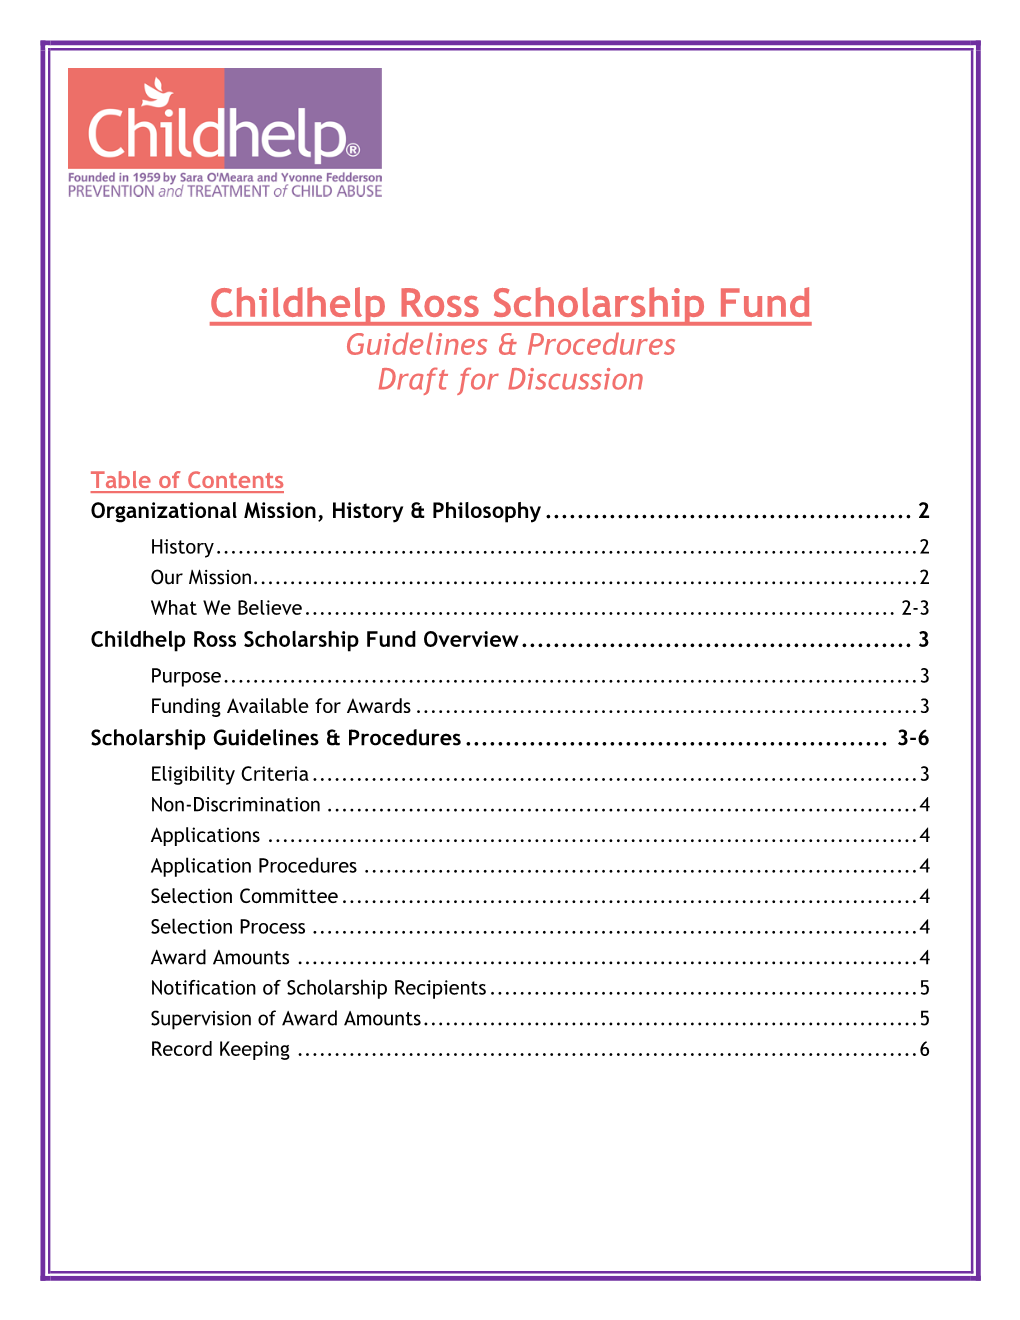 Childhelp Ross Scholarship Fund Guidelines & Procedures Draft for Discussion